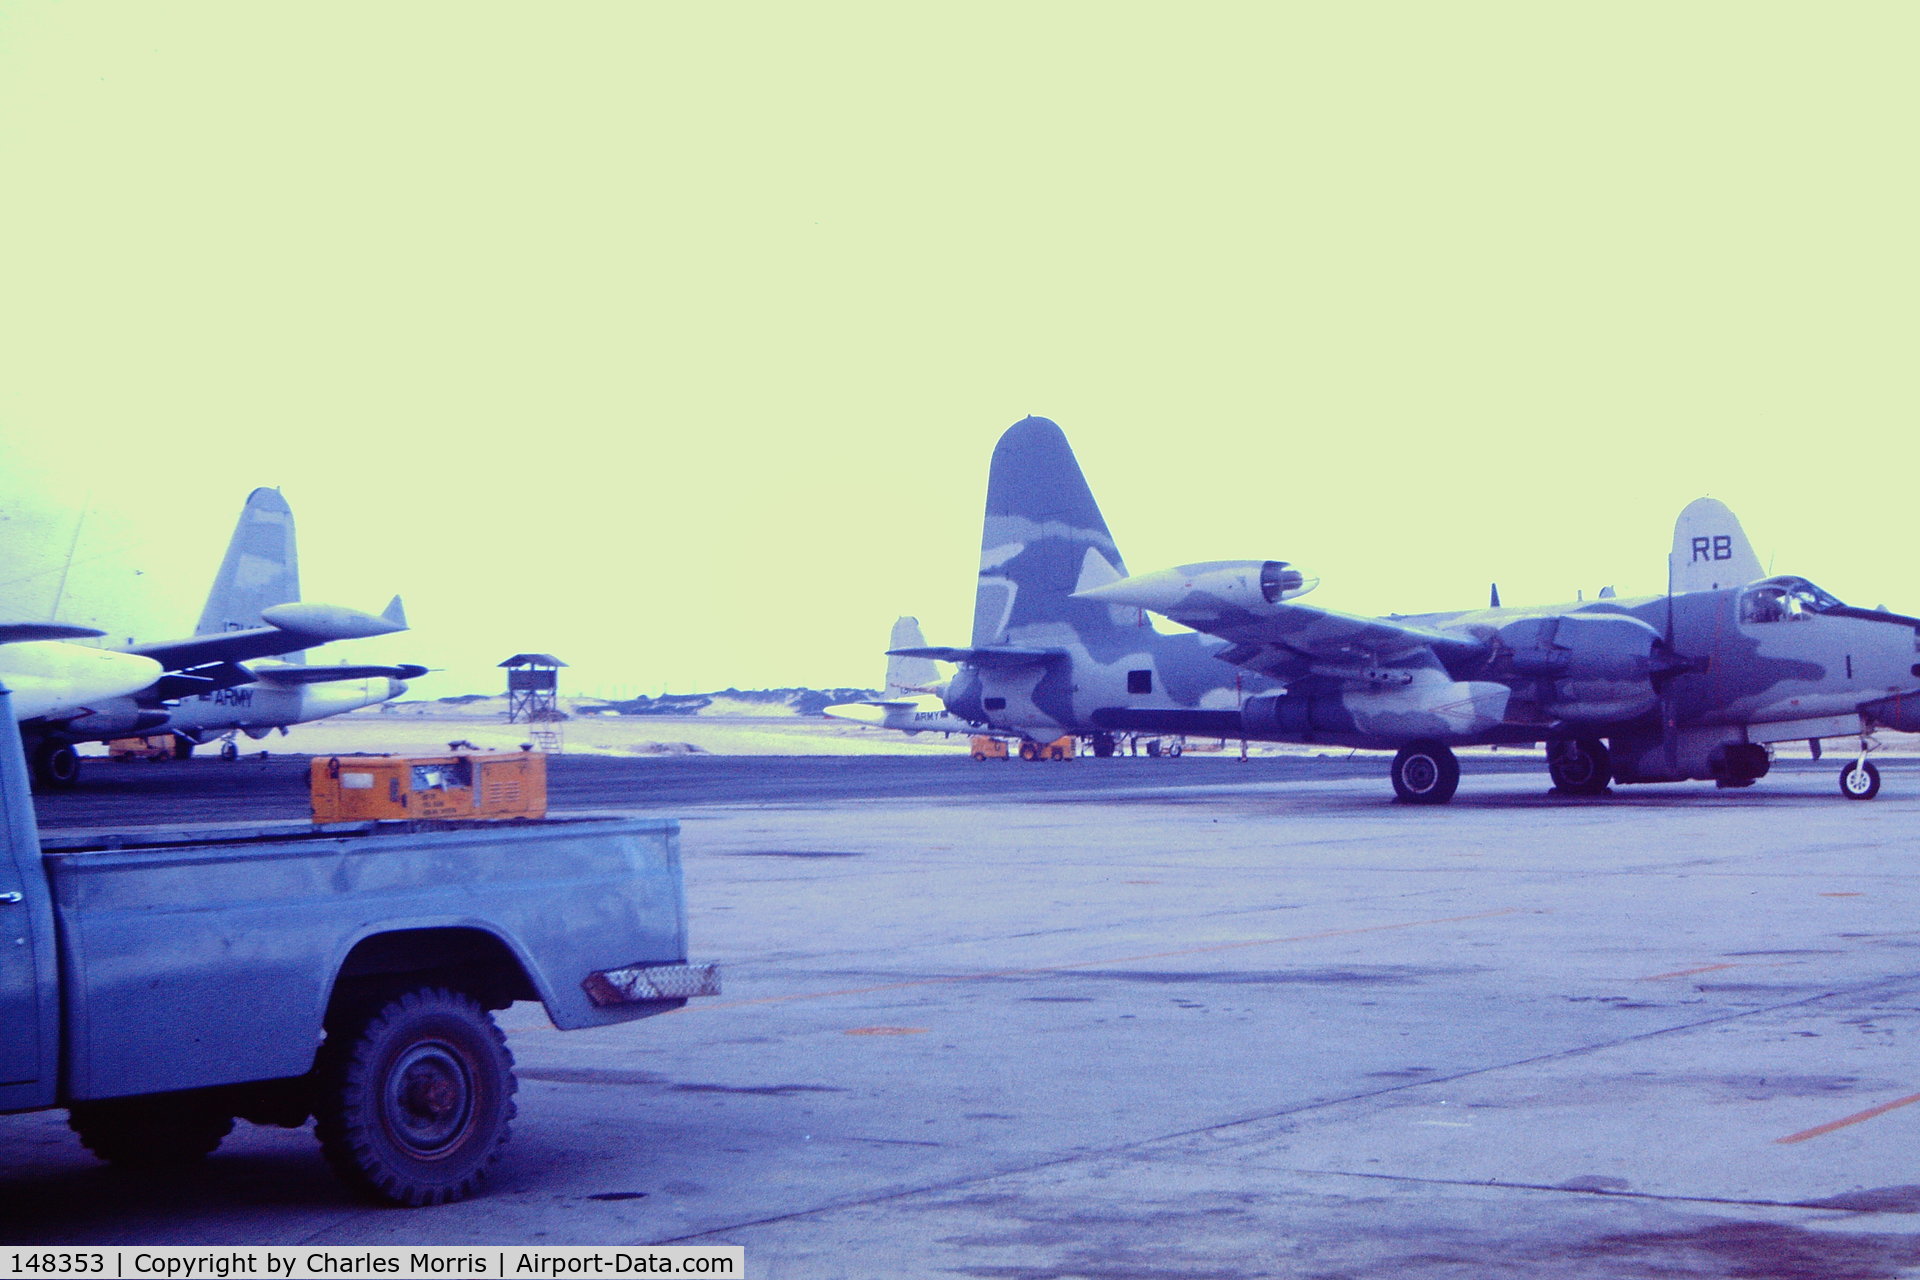 148353, 1961 Lockheed AP-2H Neptune C/N 726-7239, 1967 Cam Ranh Bay, Vietnam. We were busy, these guys only flew at night, and I am sure only 148353 was the only one here at that time. We left after Tet offensive late spring 1968.